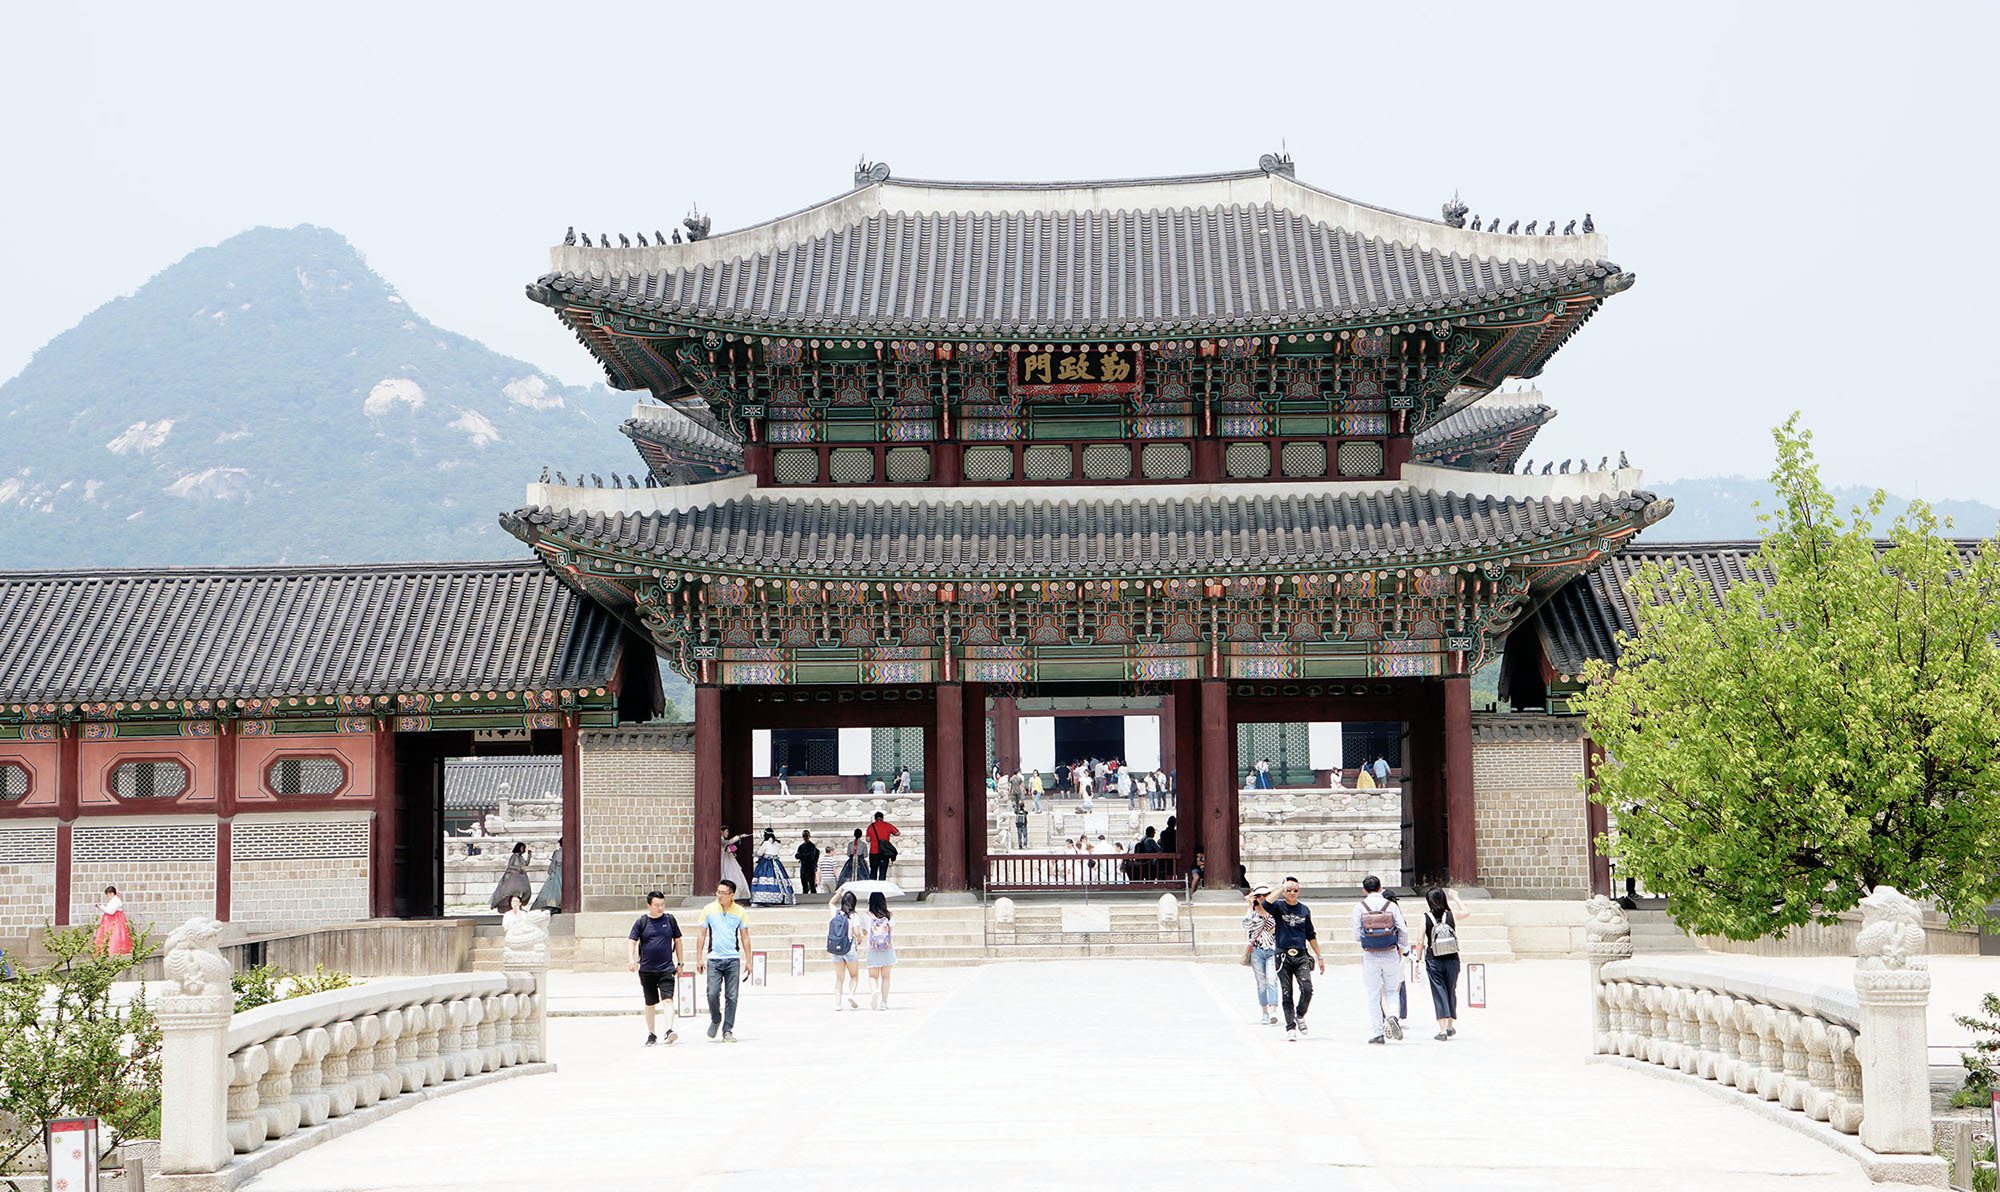 Buildings of Gyeongbokgung Palace with a backdrop of mountains Seoul Republic of Korea